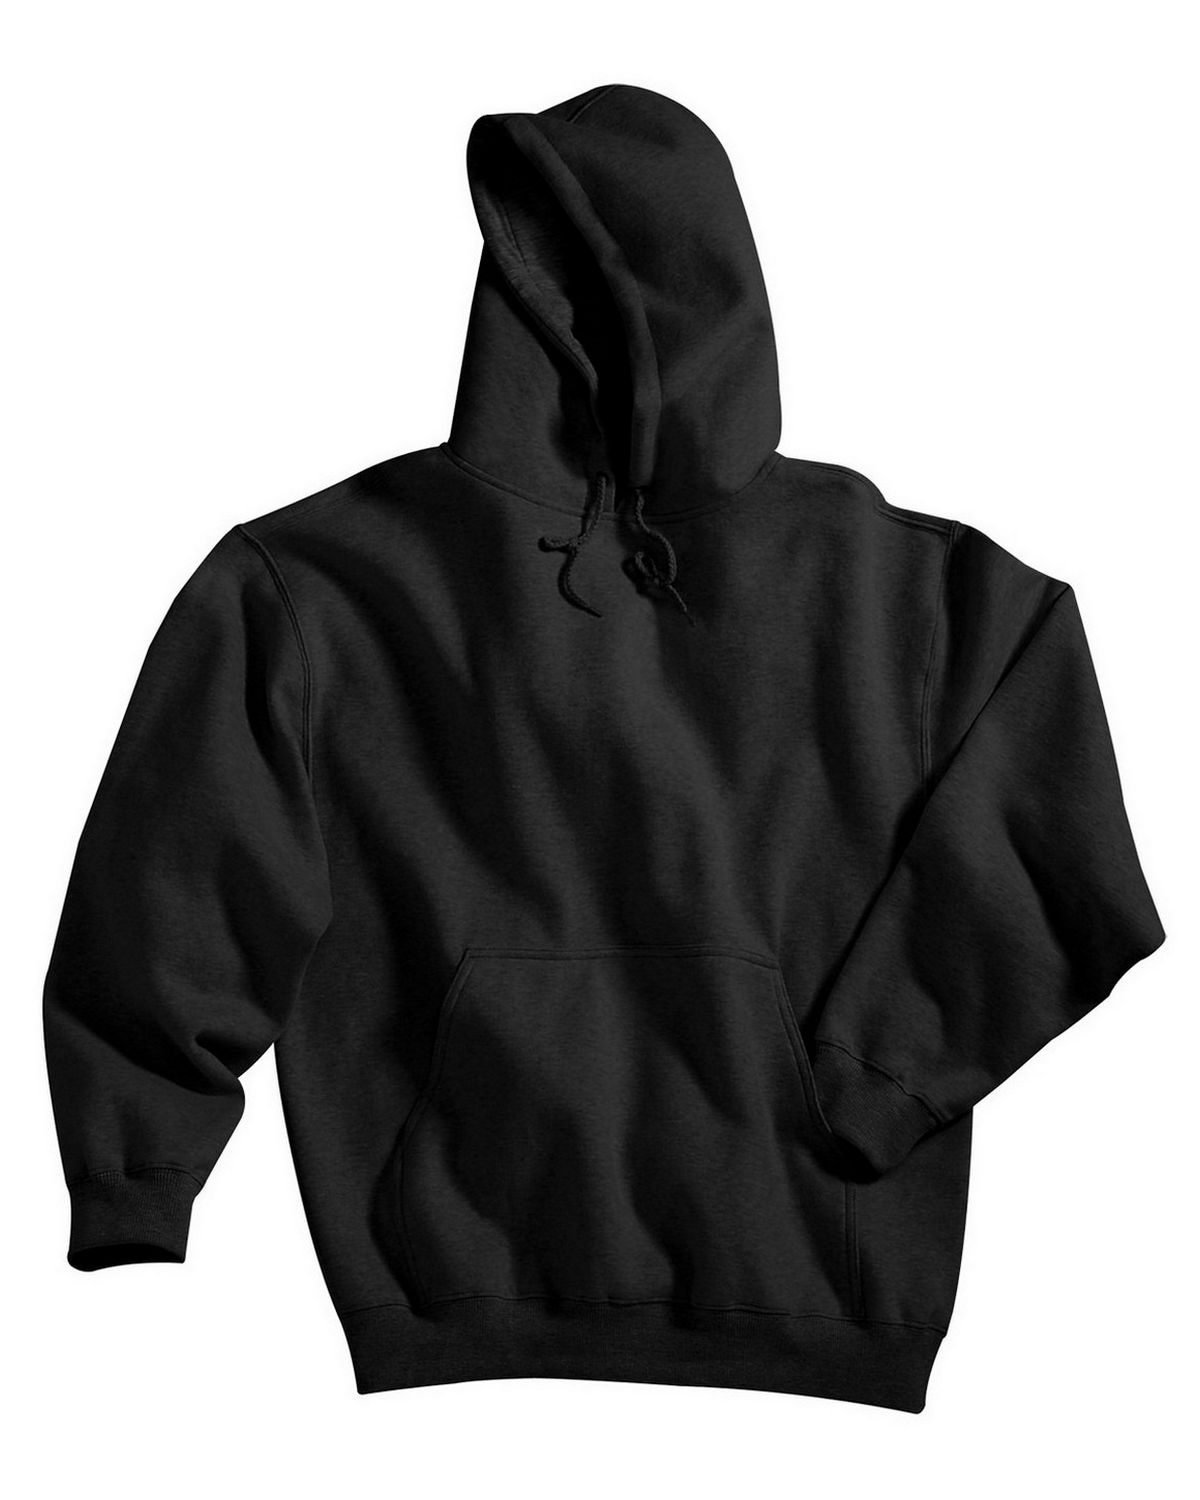 Tri-Mountain 689 Cotton/poly sueded finish hooded sweatshirt